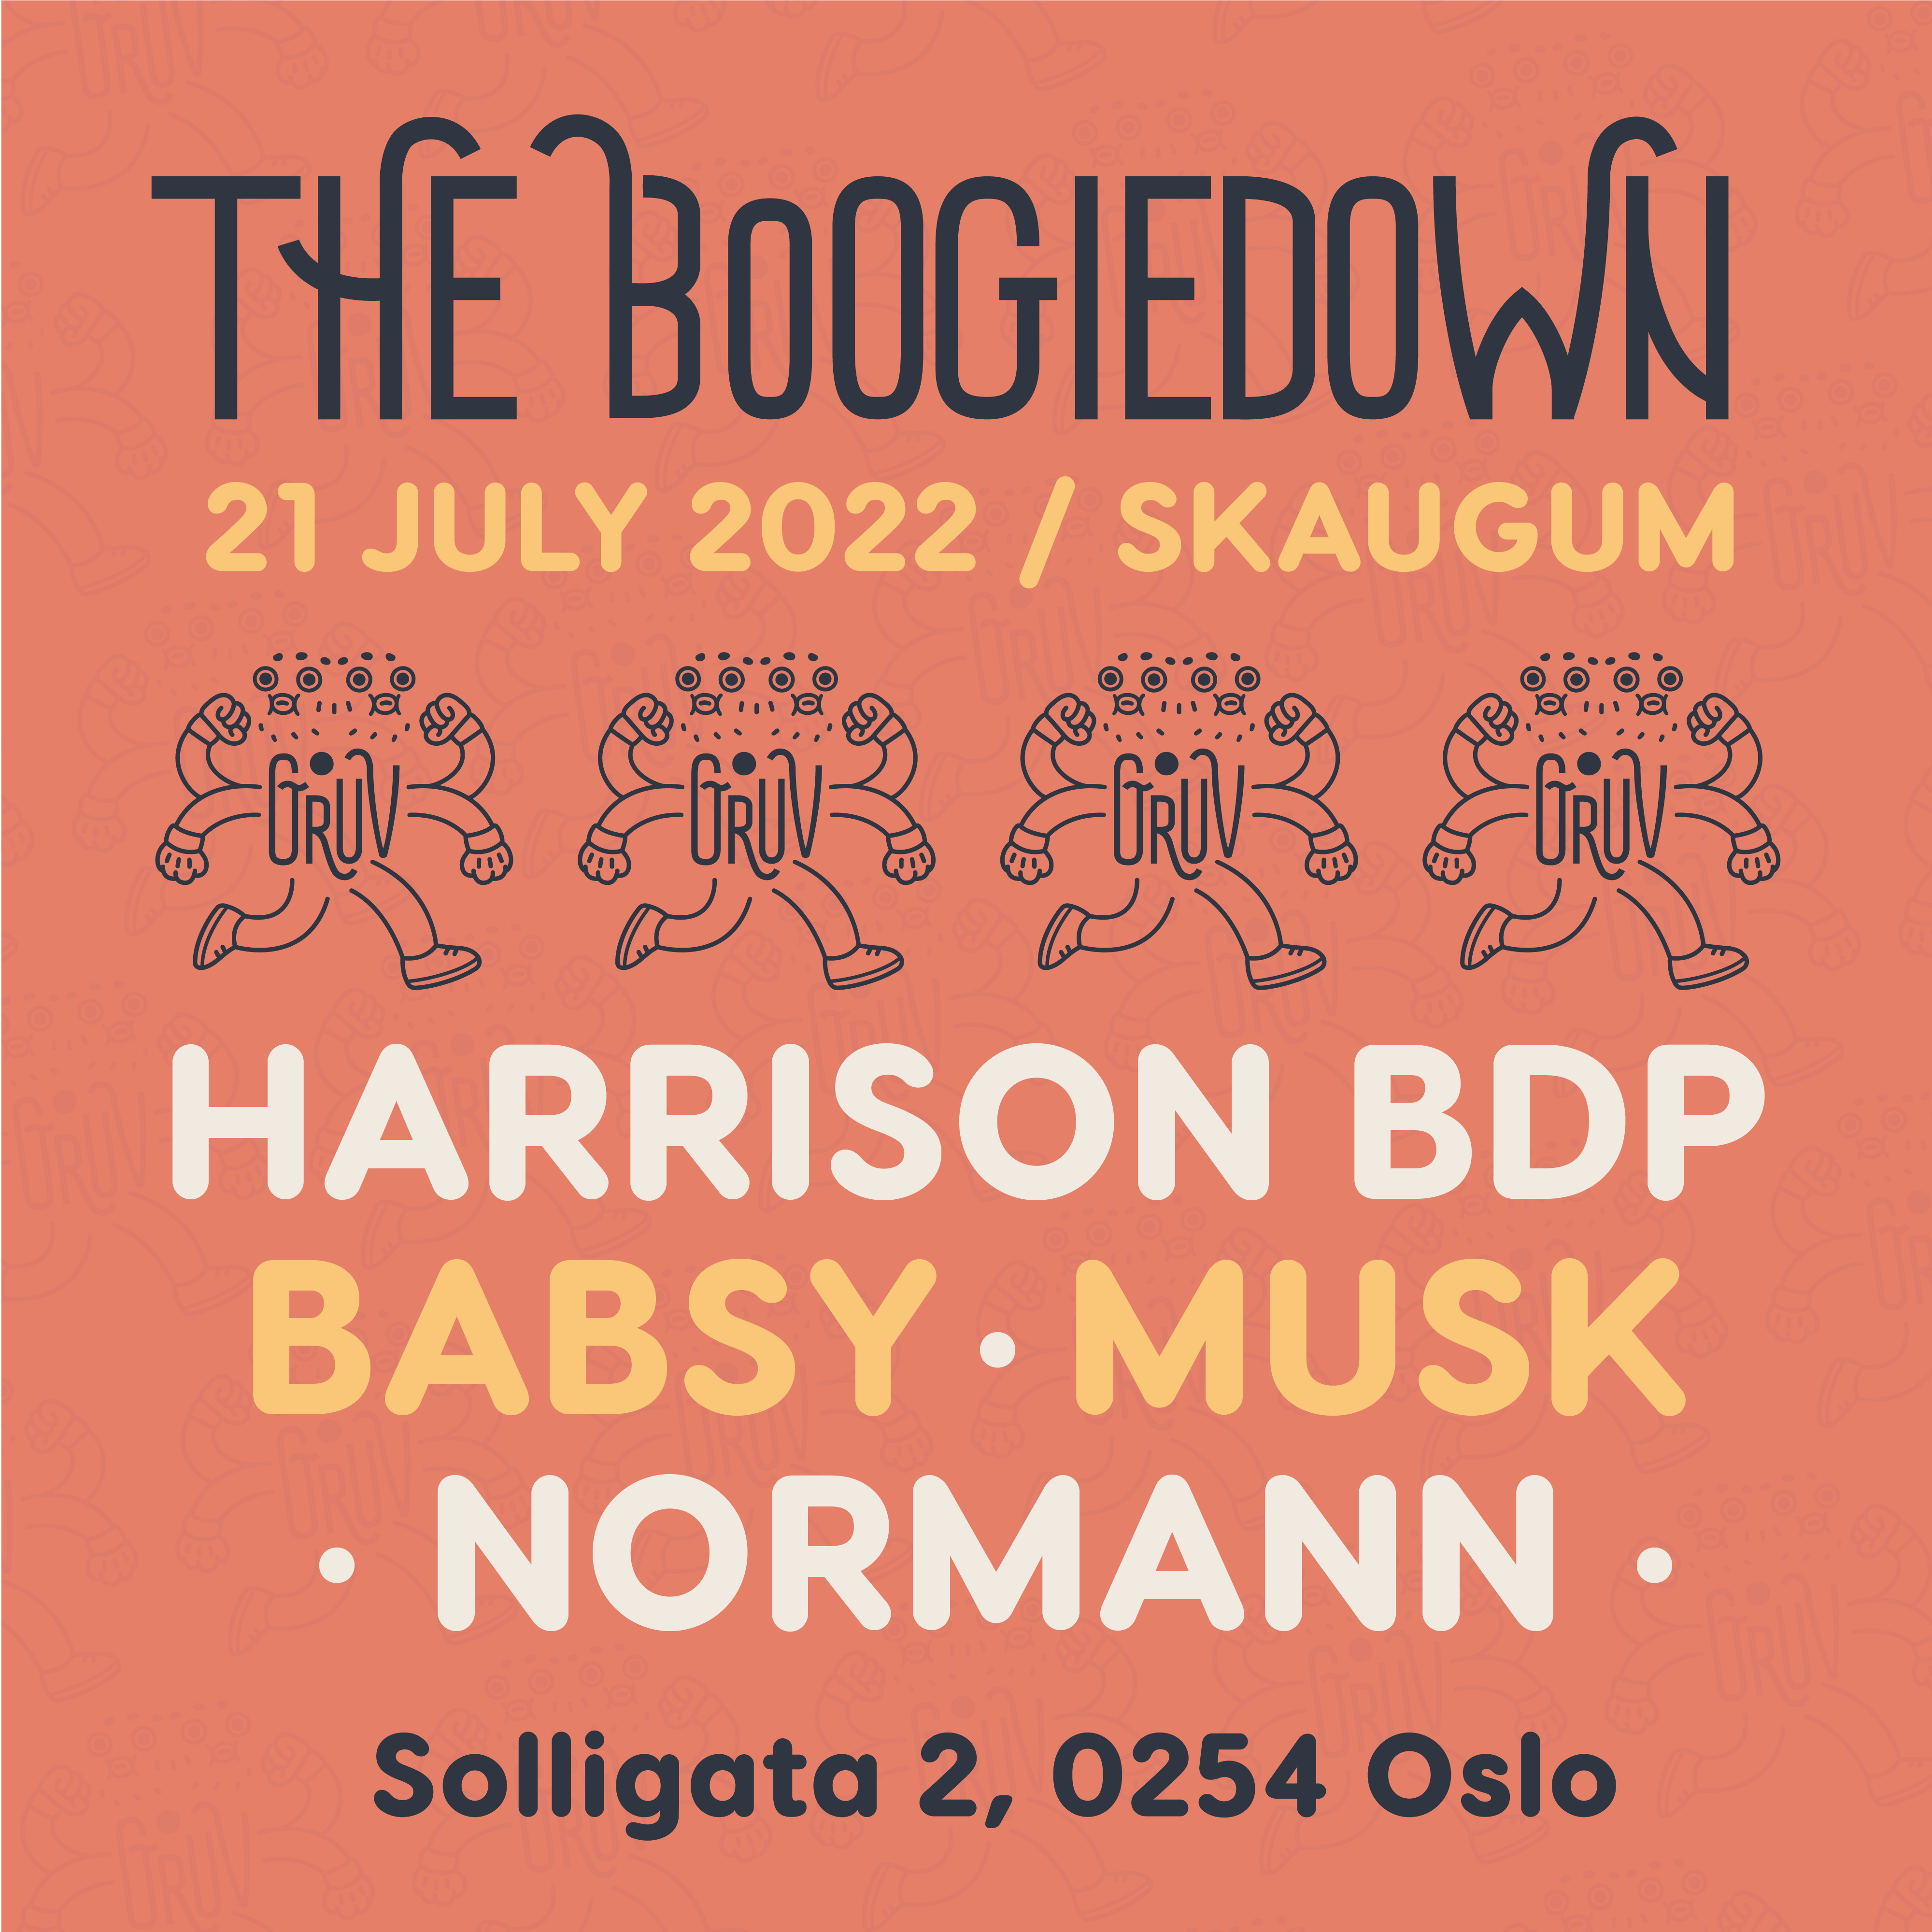 Gruv: The Boogiedown at Skaugum with Harrison BDP, Babsy, Musk, Normann - Página frontal